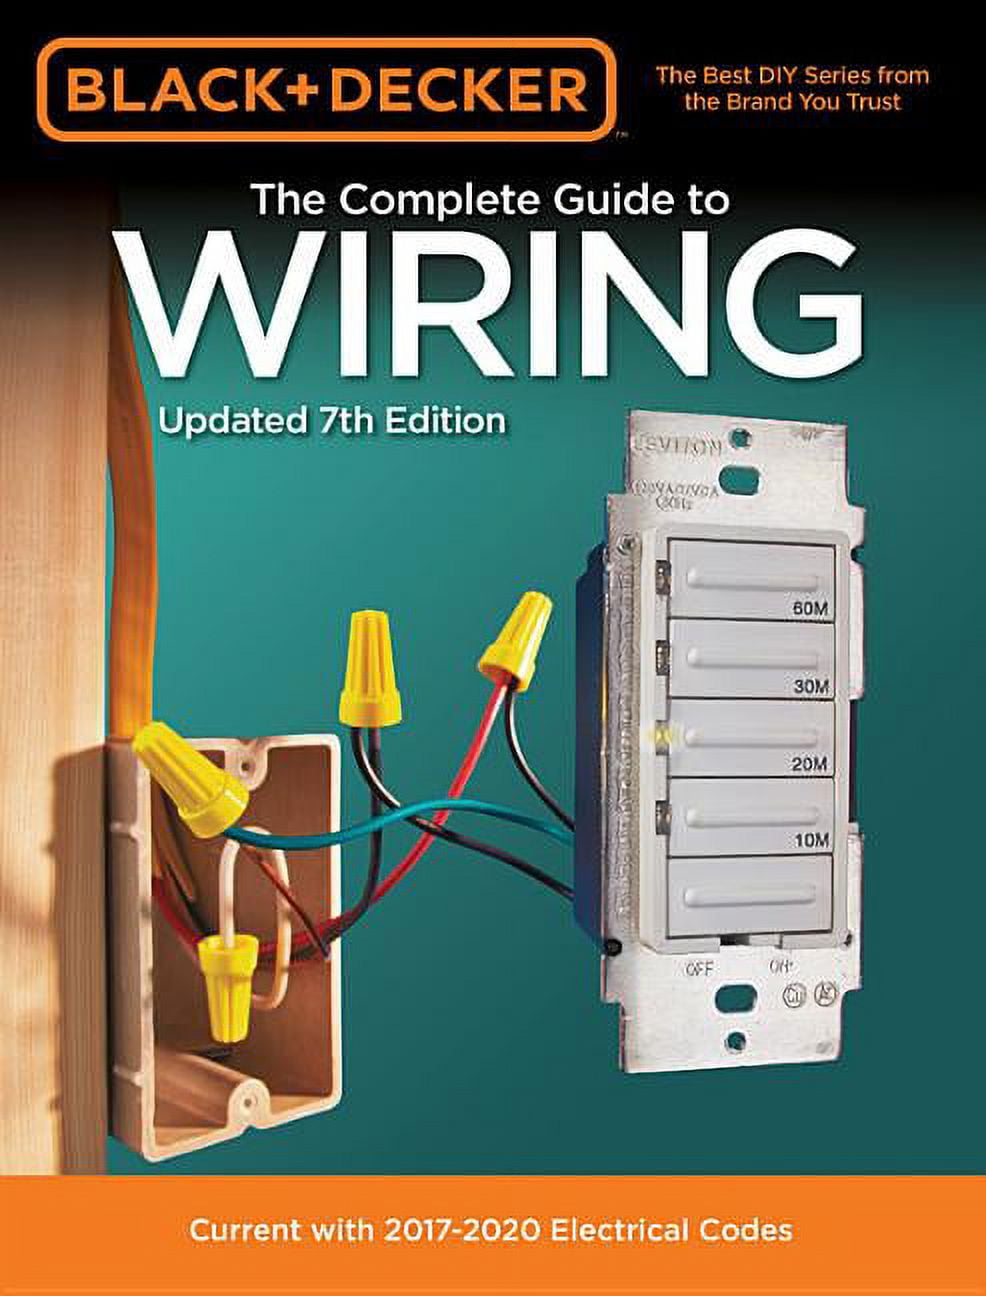 Black & Decker The Complete Guide to Wiring, Updated 7th Edition : Current with 2017-2020 Electrical Codes